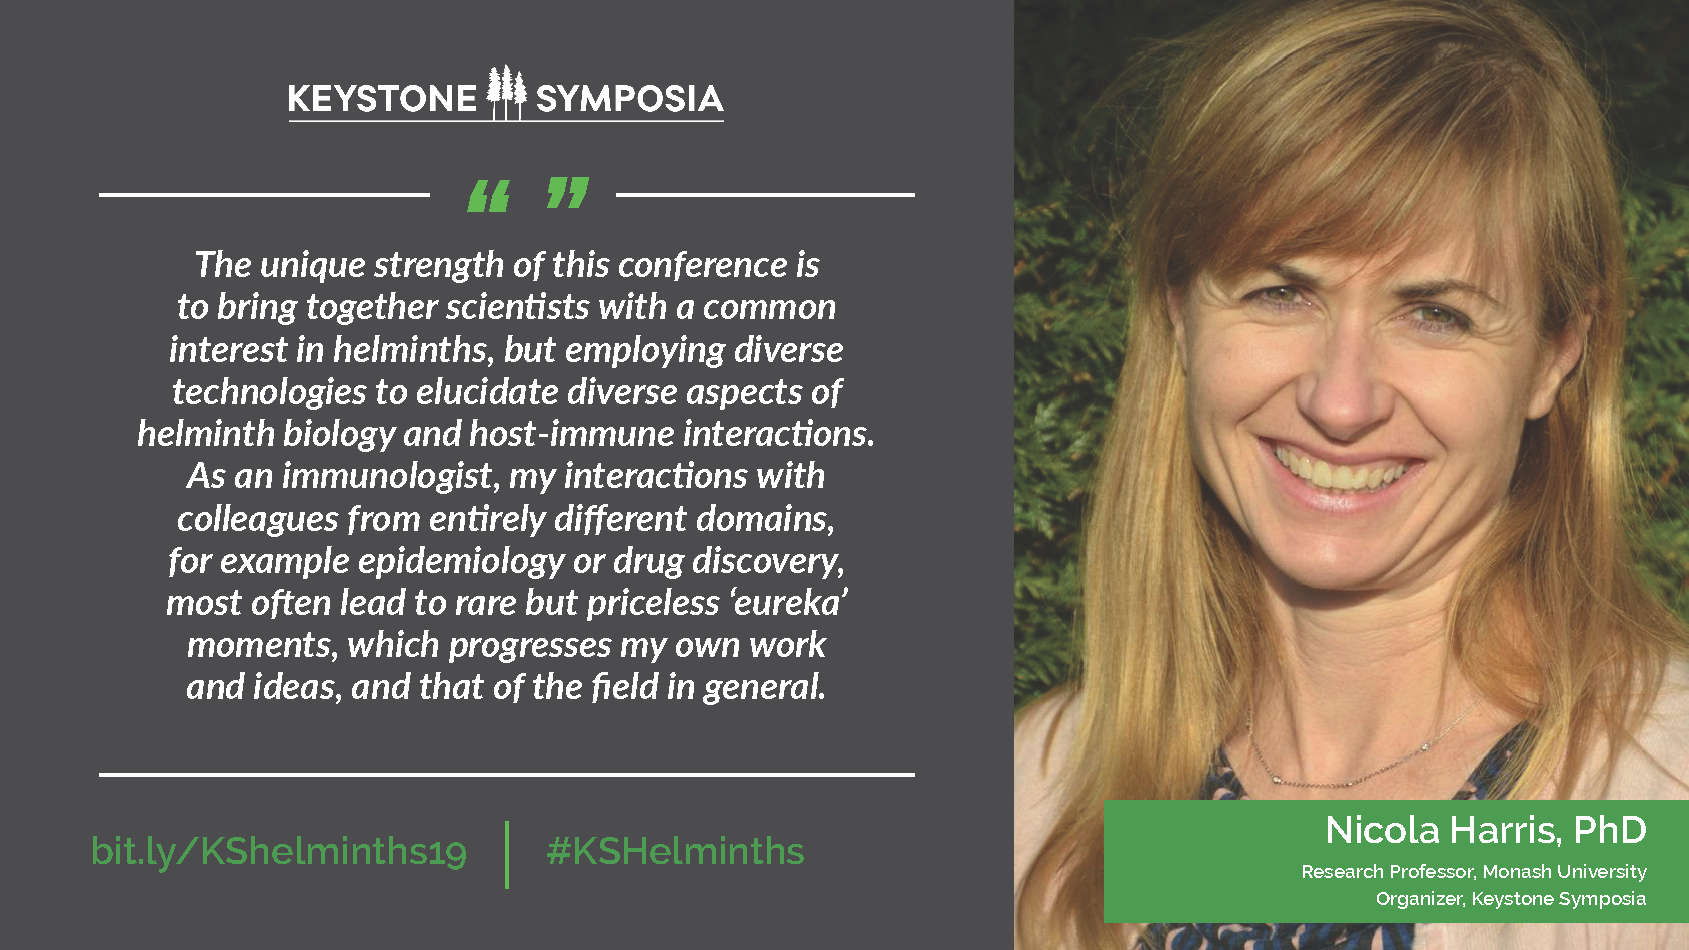 Quote from Nicola Harris: The unique strength of this conference is to bring together scientists with a common interest in helminths, but employing diverse technologies to elucidate diverse aspects of helminth biology and host-immune interactions. As an immunologist, my interactions with colleagues from entirely different domains, for example epidemiology or drug discovery, most often lead to rare but priceless 'eureka' moments, which progresses my own work and ideas, and that of the field in general.